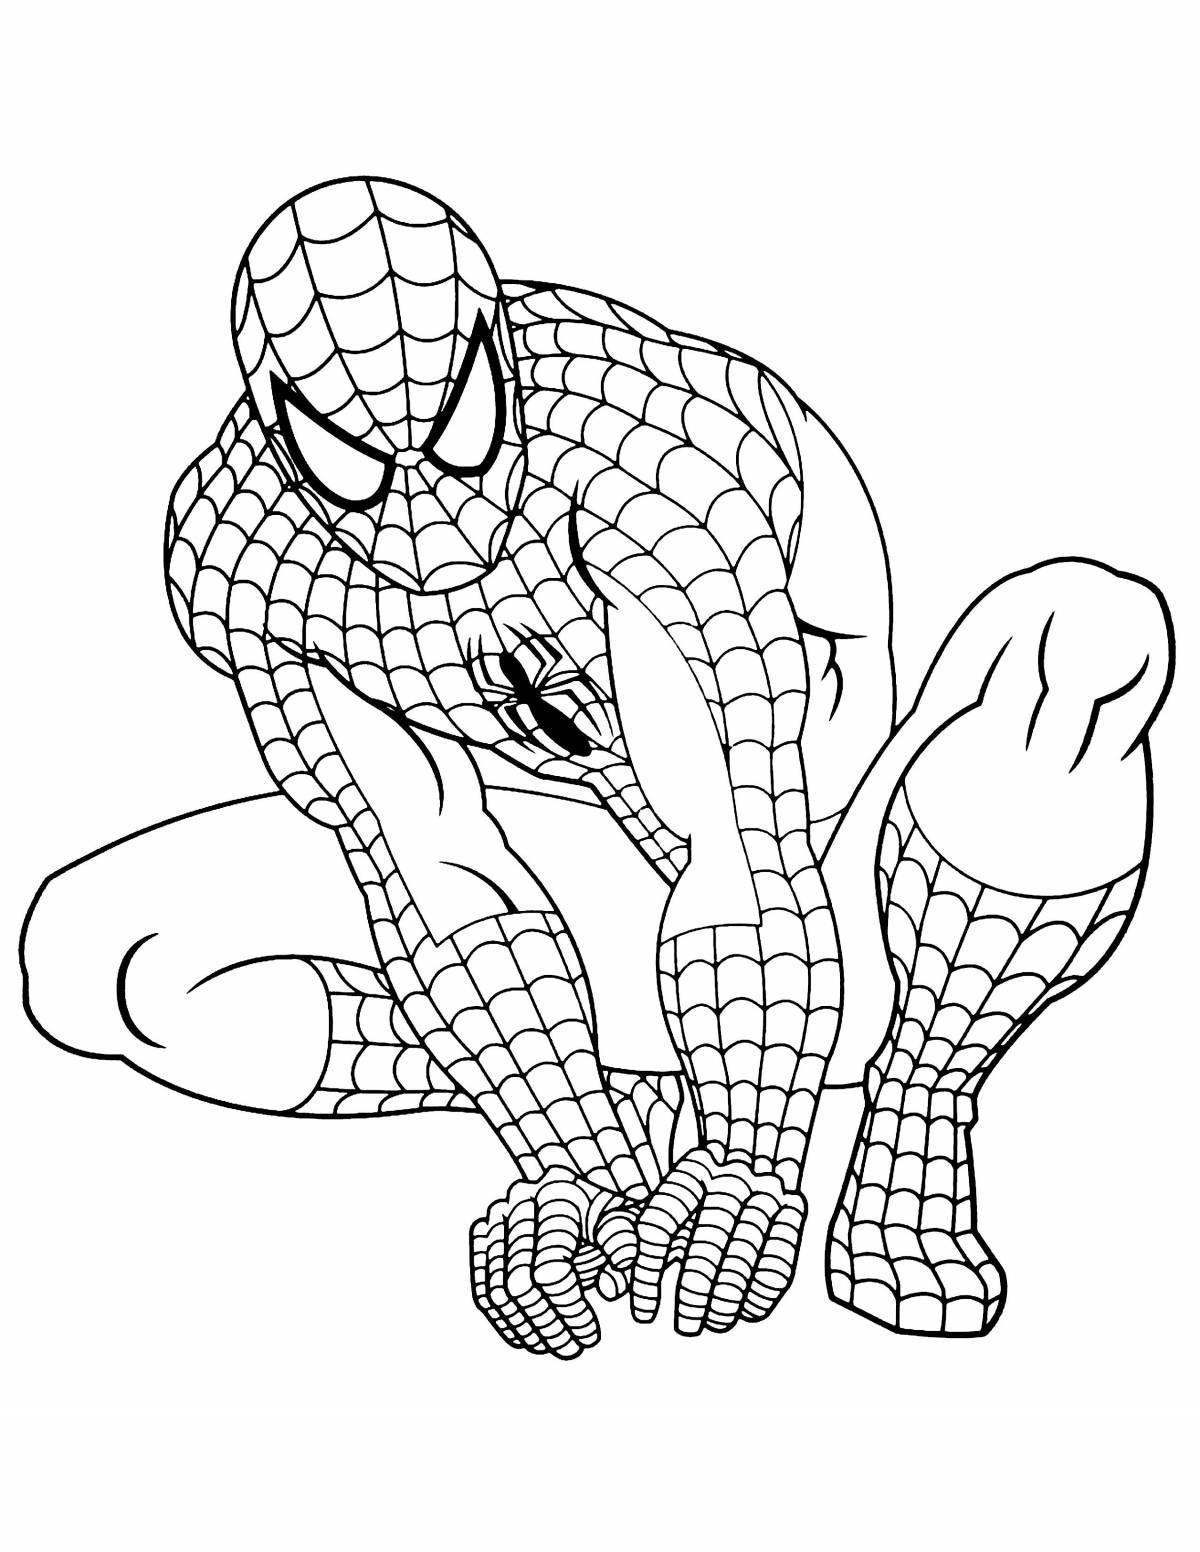 Gorgeous Spider-man coloring book for boys